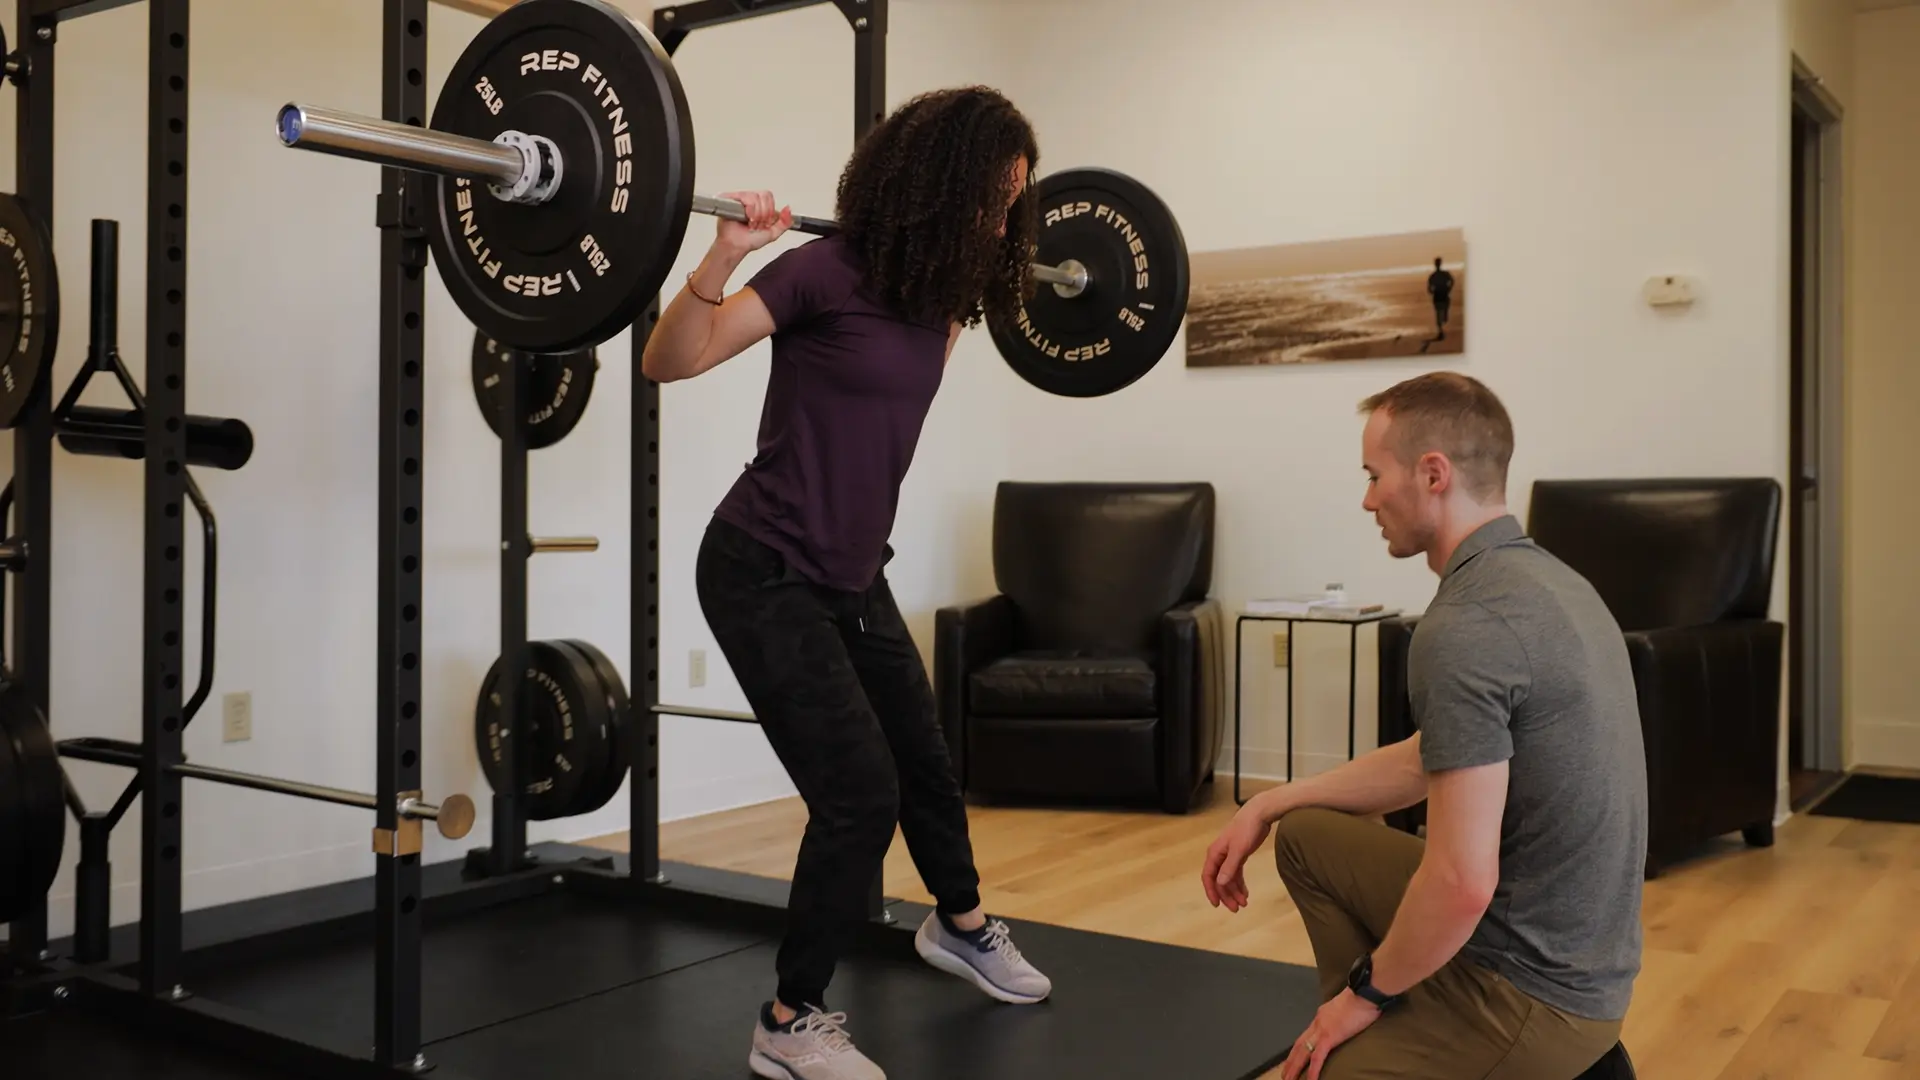 A person with curly hair performs a squat with a barbell on their shoulders in a gym, under the watchful eye of a seated physical therapy trainer nearby.